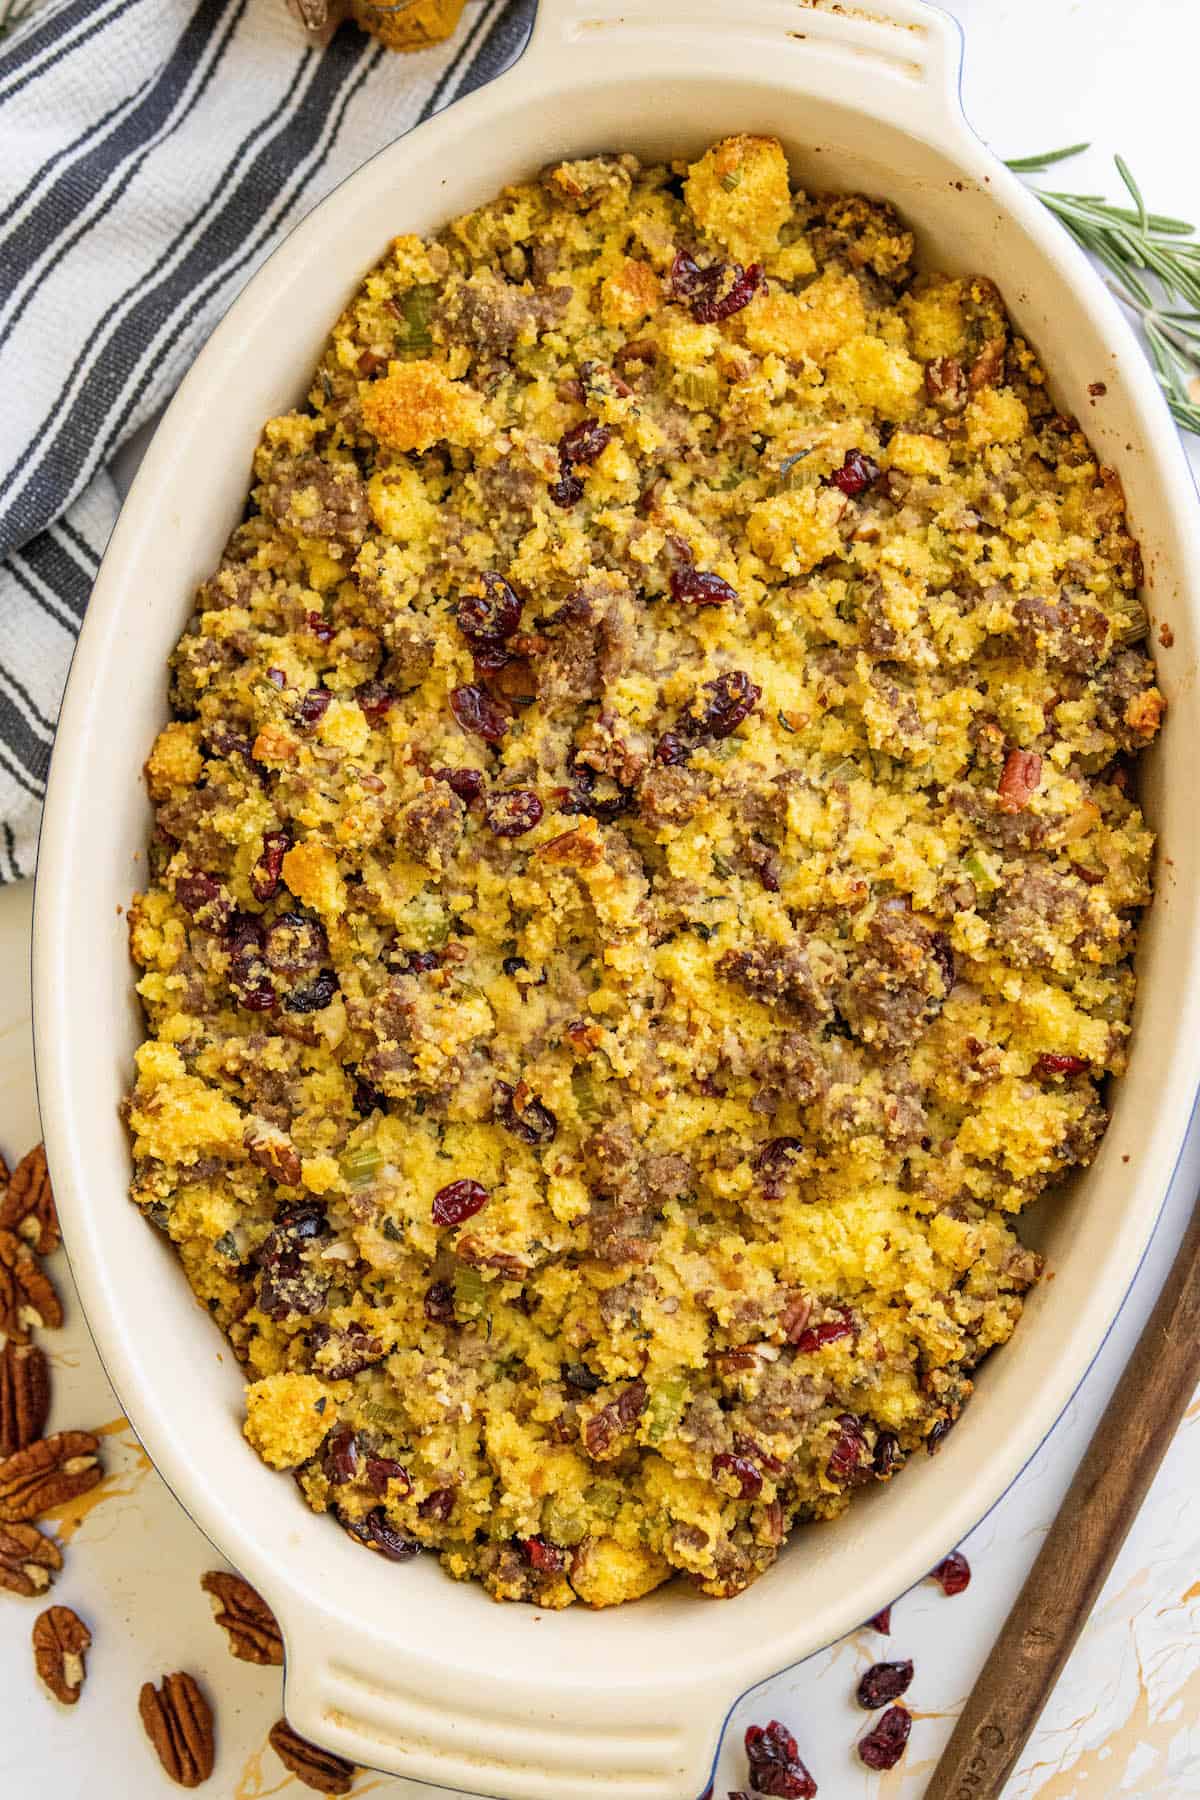 Cranberry sausage stuffing in a white dish with cornbread.